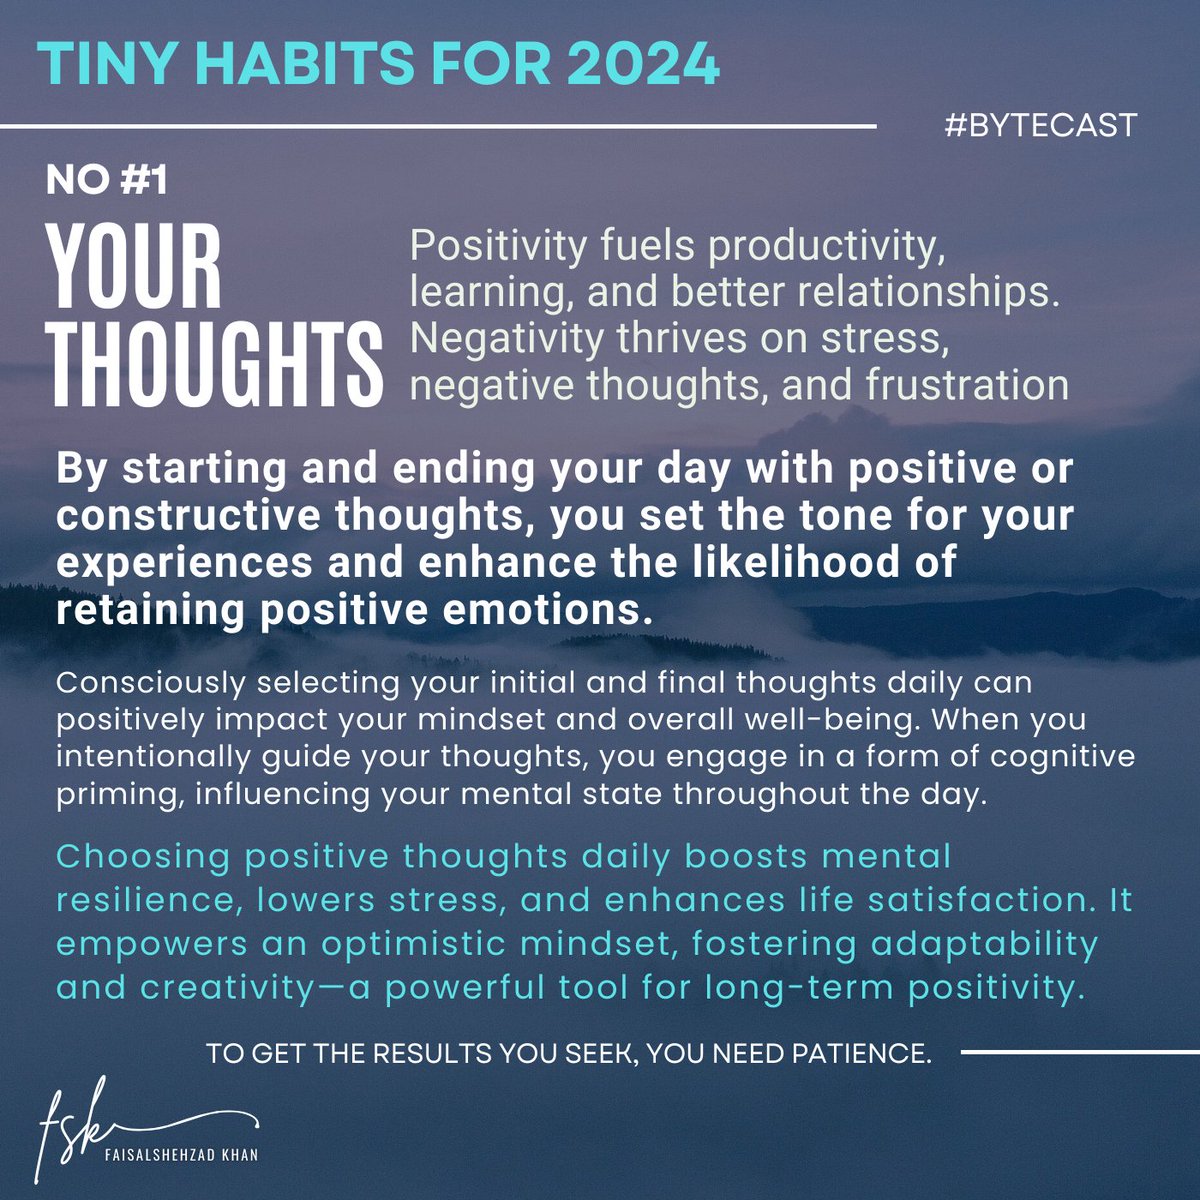 Start and end your day with positivity!  Choosing upbeat thoughts consciously boosts your mood. It's like a mental power-up! 

#PositiveMindset #DailyHabit #habits #tinyhabits #atomichabitsbook #fsk #faisalkhan #bytecast #NewYear #newyearresolution #positivity #thoughts